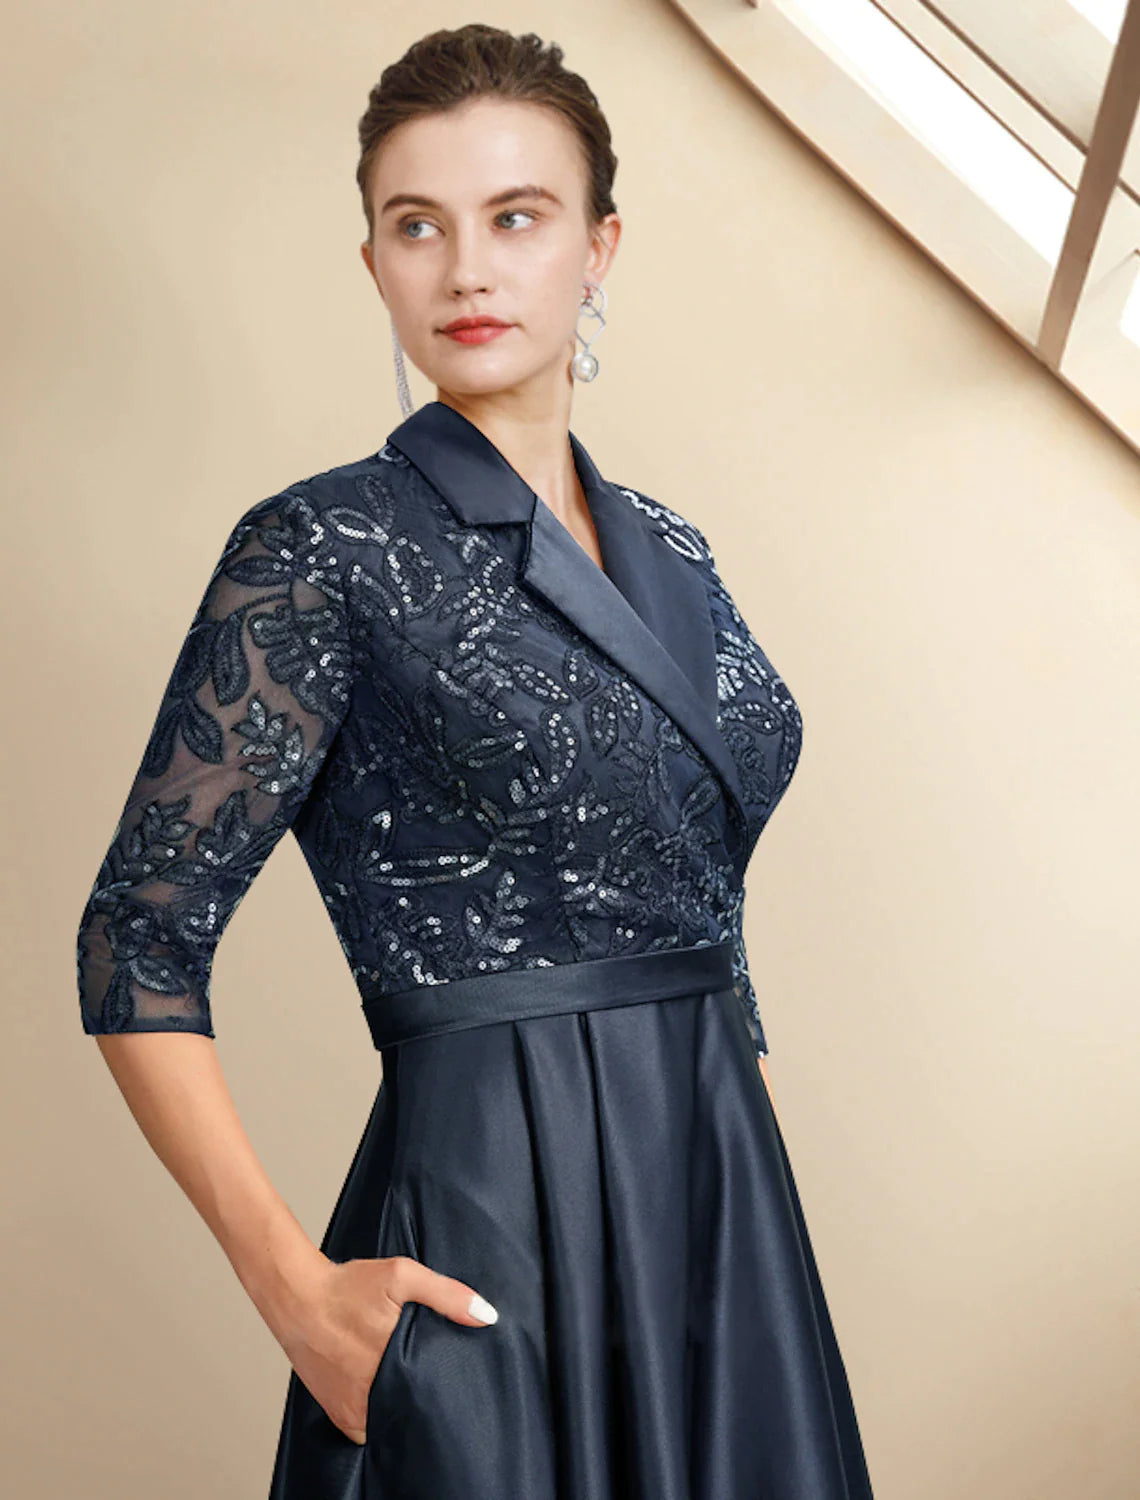 A-Line Mother of the Bride Dress Plus Size Elegant High Low Shirt Collar Asymmetrical Tea Length Satin Lace Half Sleeve with Pleats Sequin Appliques